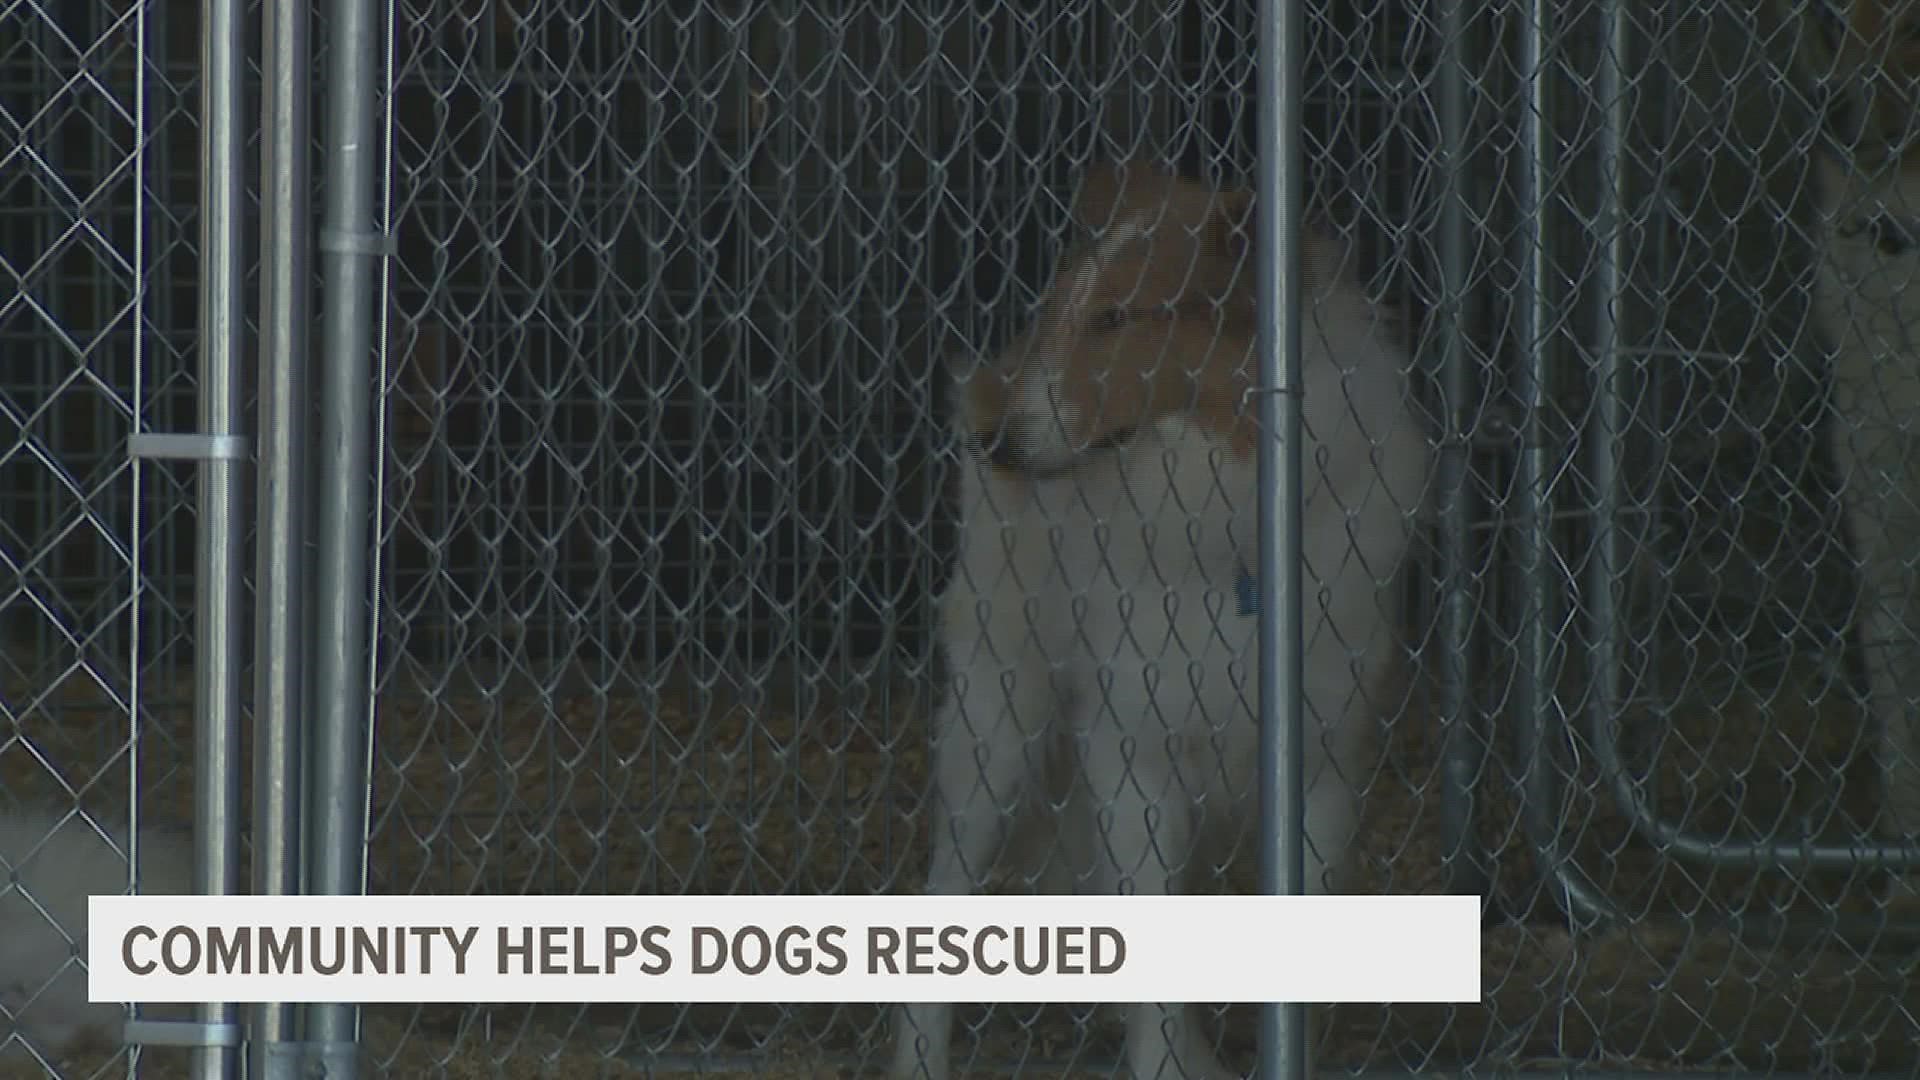 Nearly 200 dogs were seized from a Sherrard farm and their care is being coordinated through the Mercer County Animal Control.